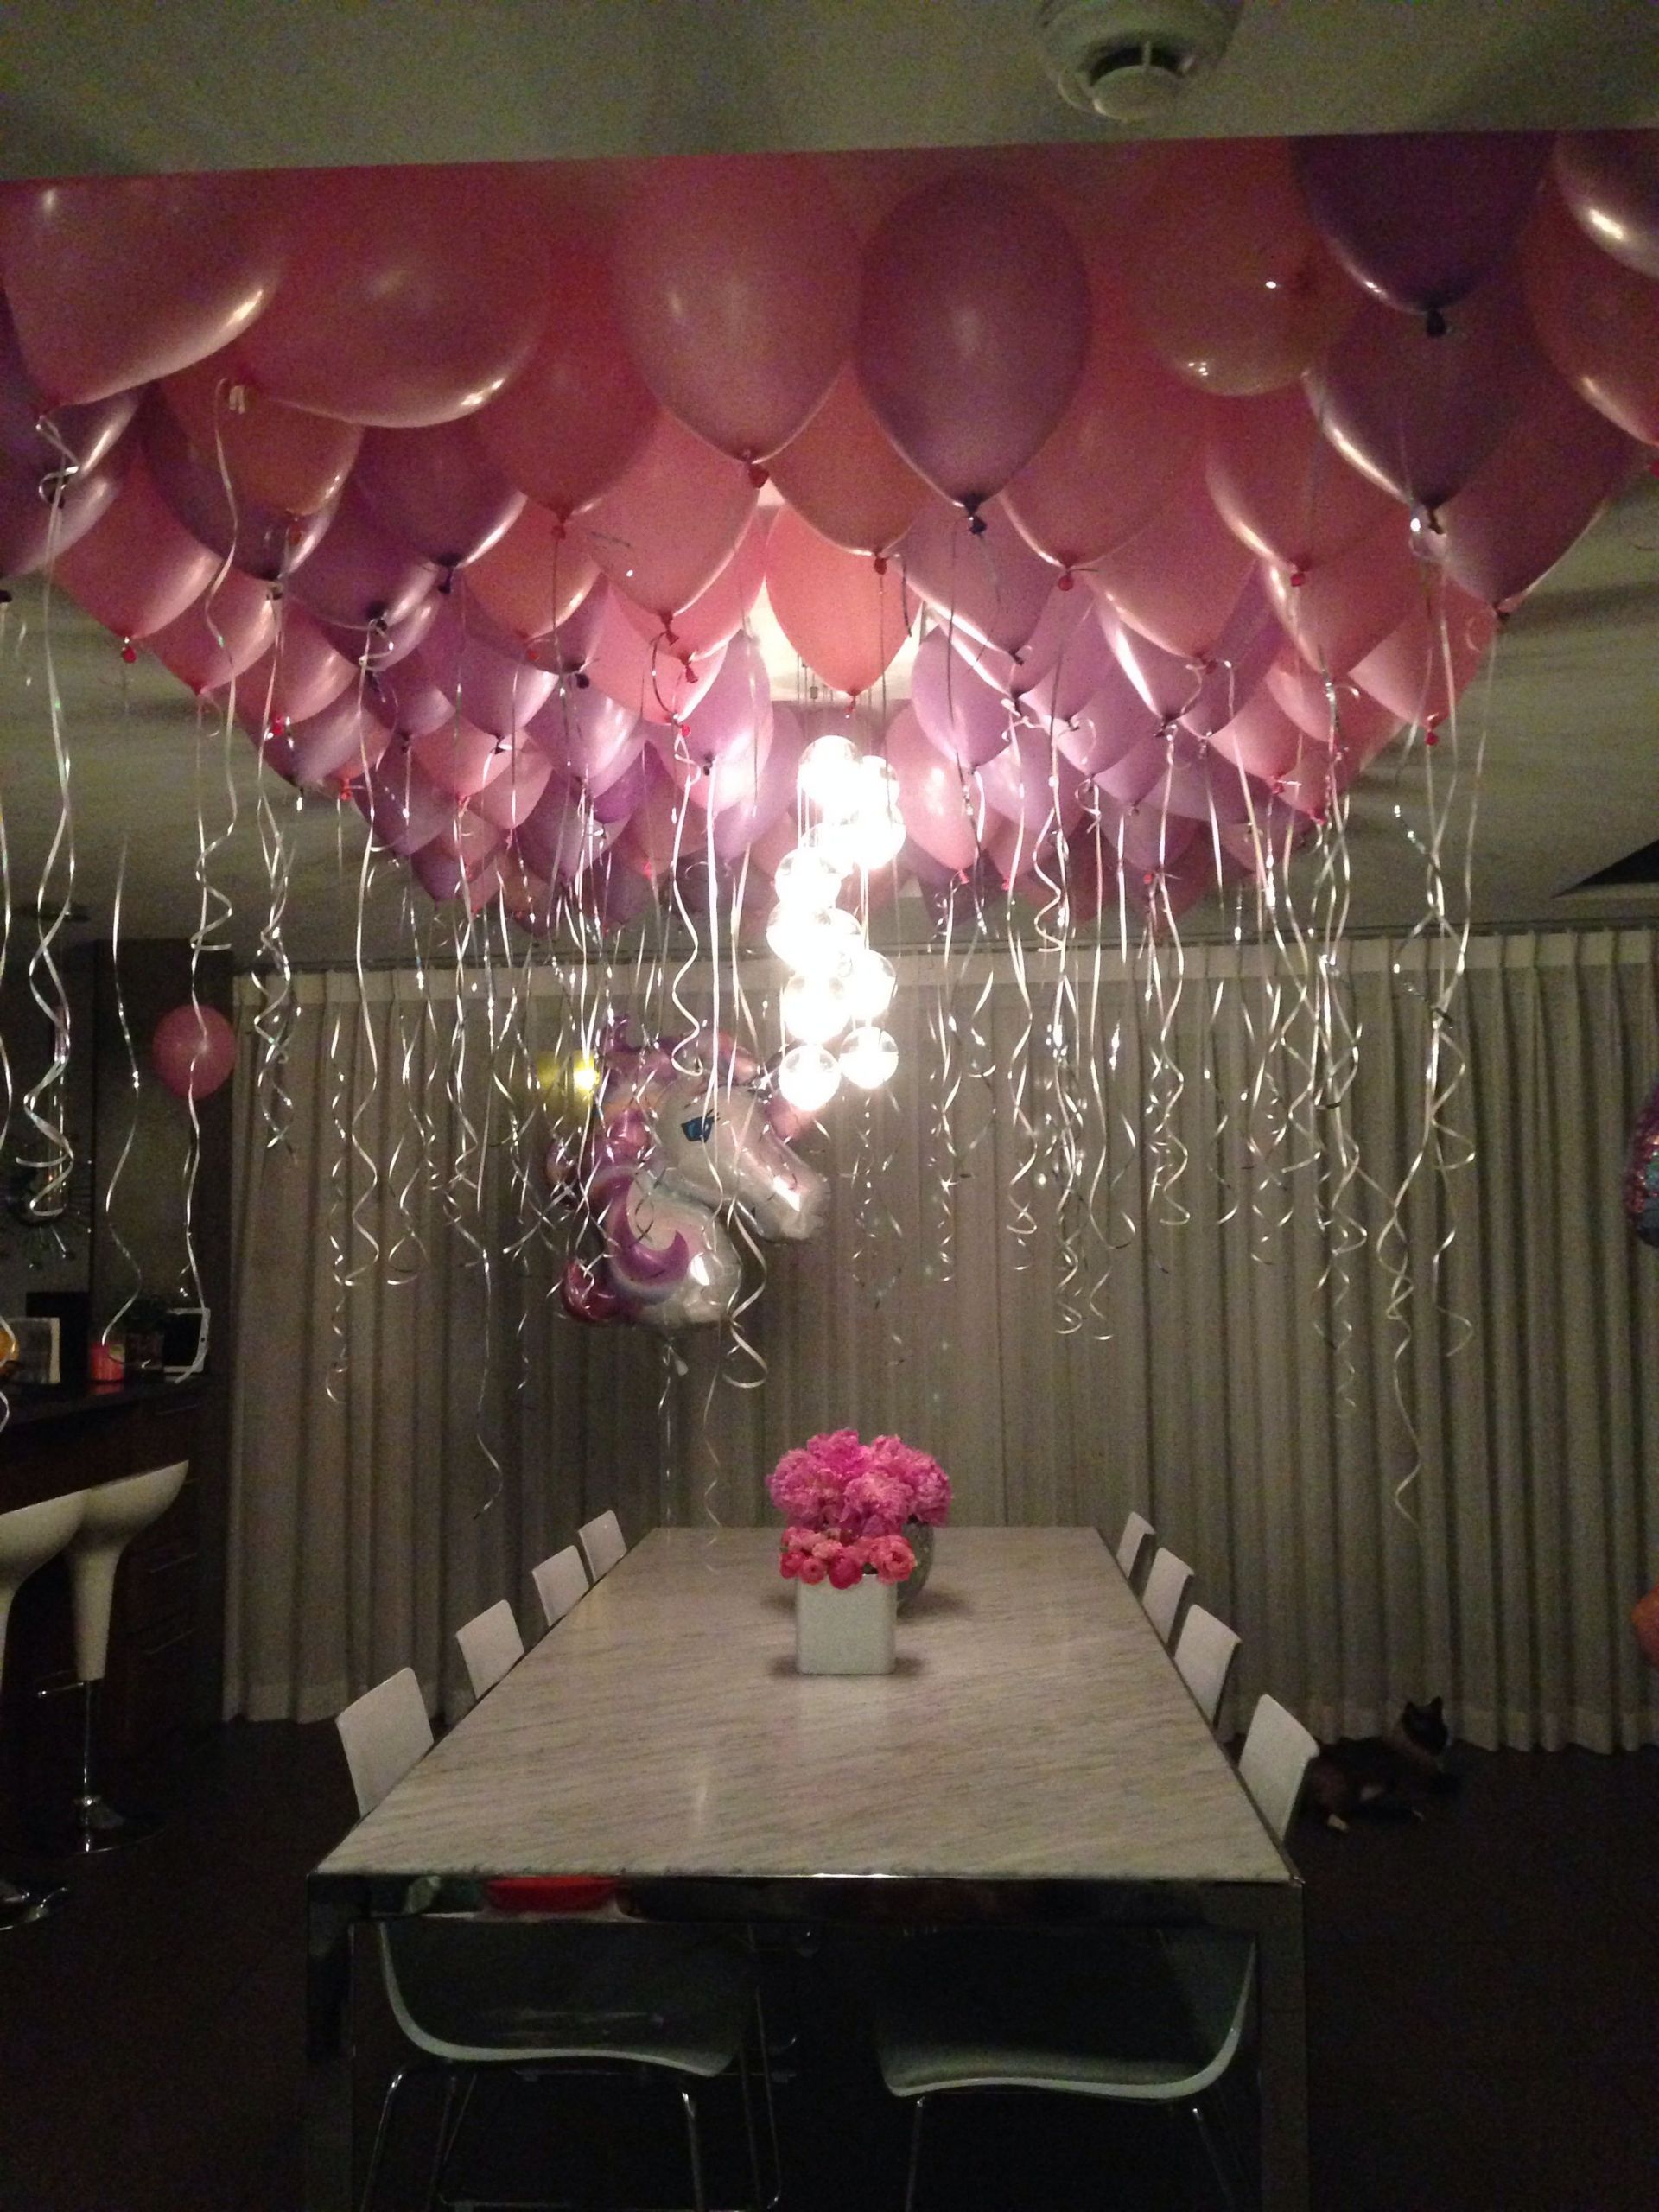 Birthday Party Ideas For 6 Year Girl
 Balloon display 6 year old girl s Birthday in 2019